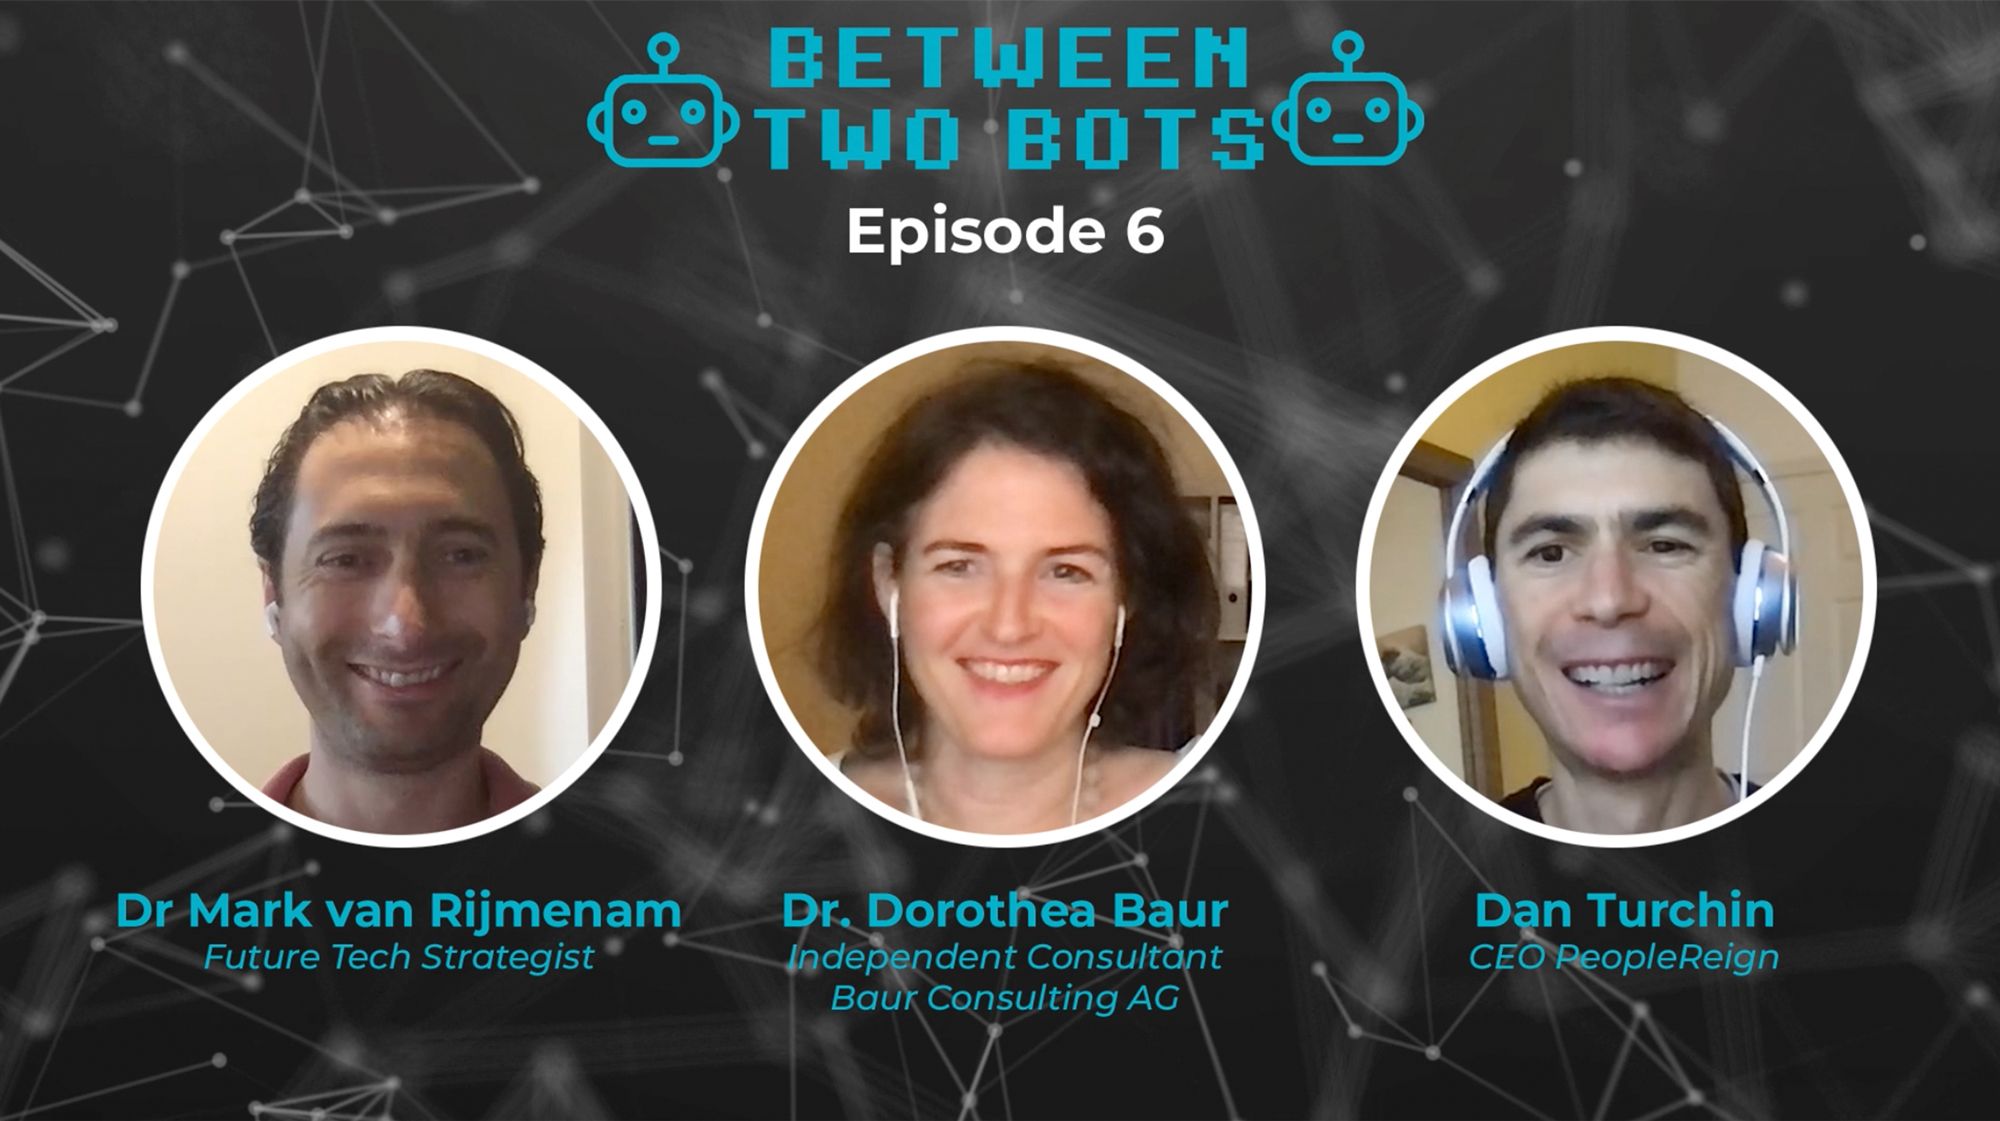 EP06 - Between Two Bots with Dr. Dorothea Baur